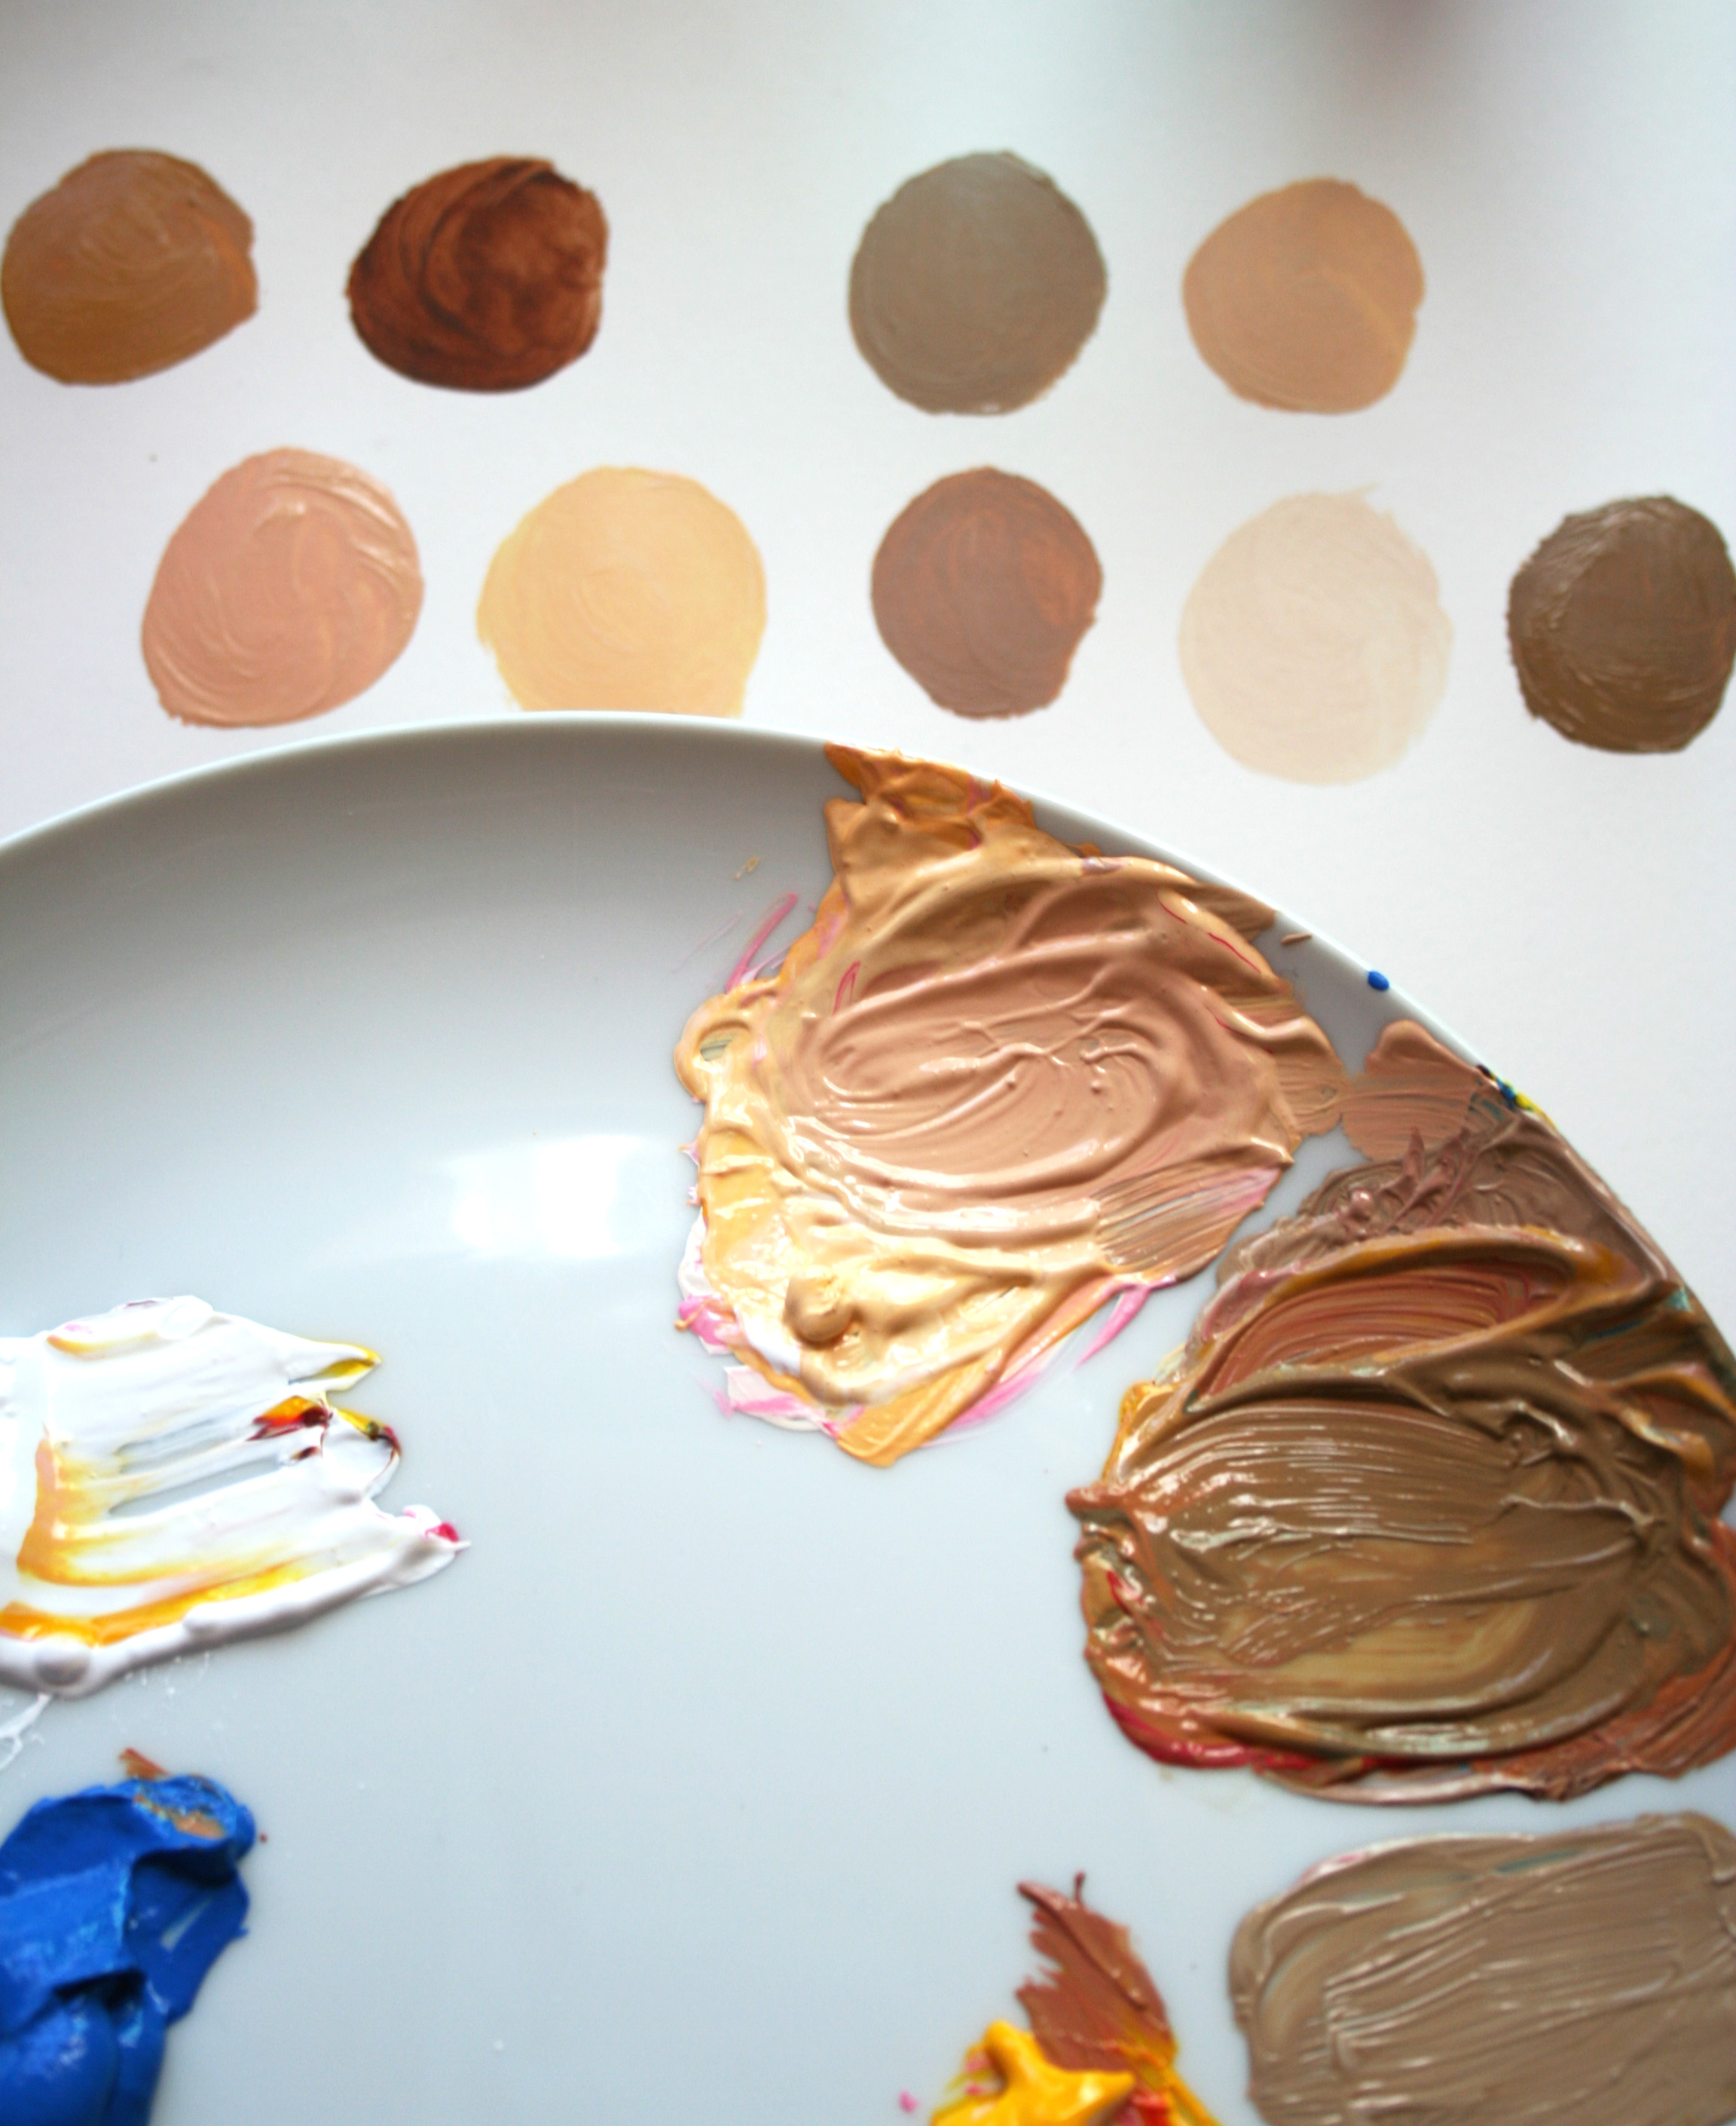 How To Make Nude Color What Color Mixing To Make Nude My Xxx Hot Girl